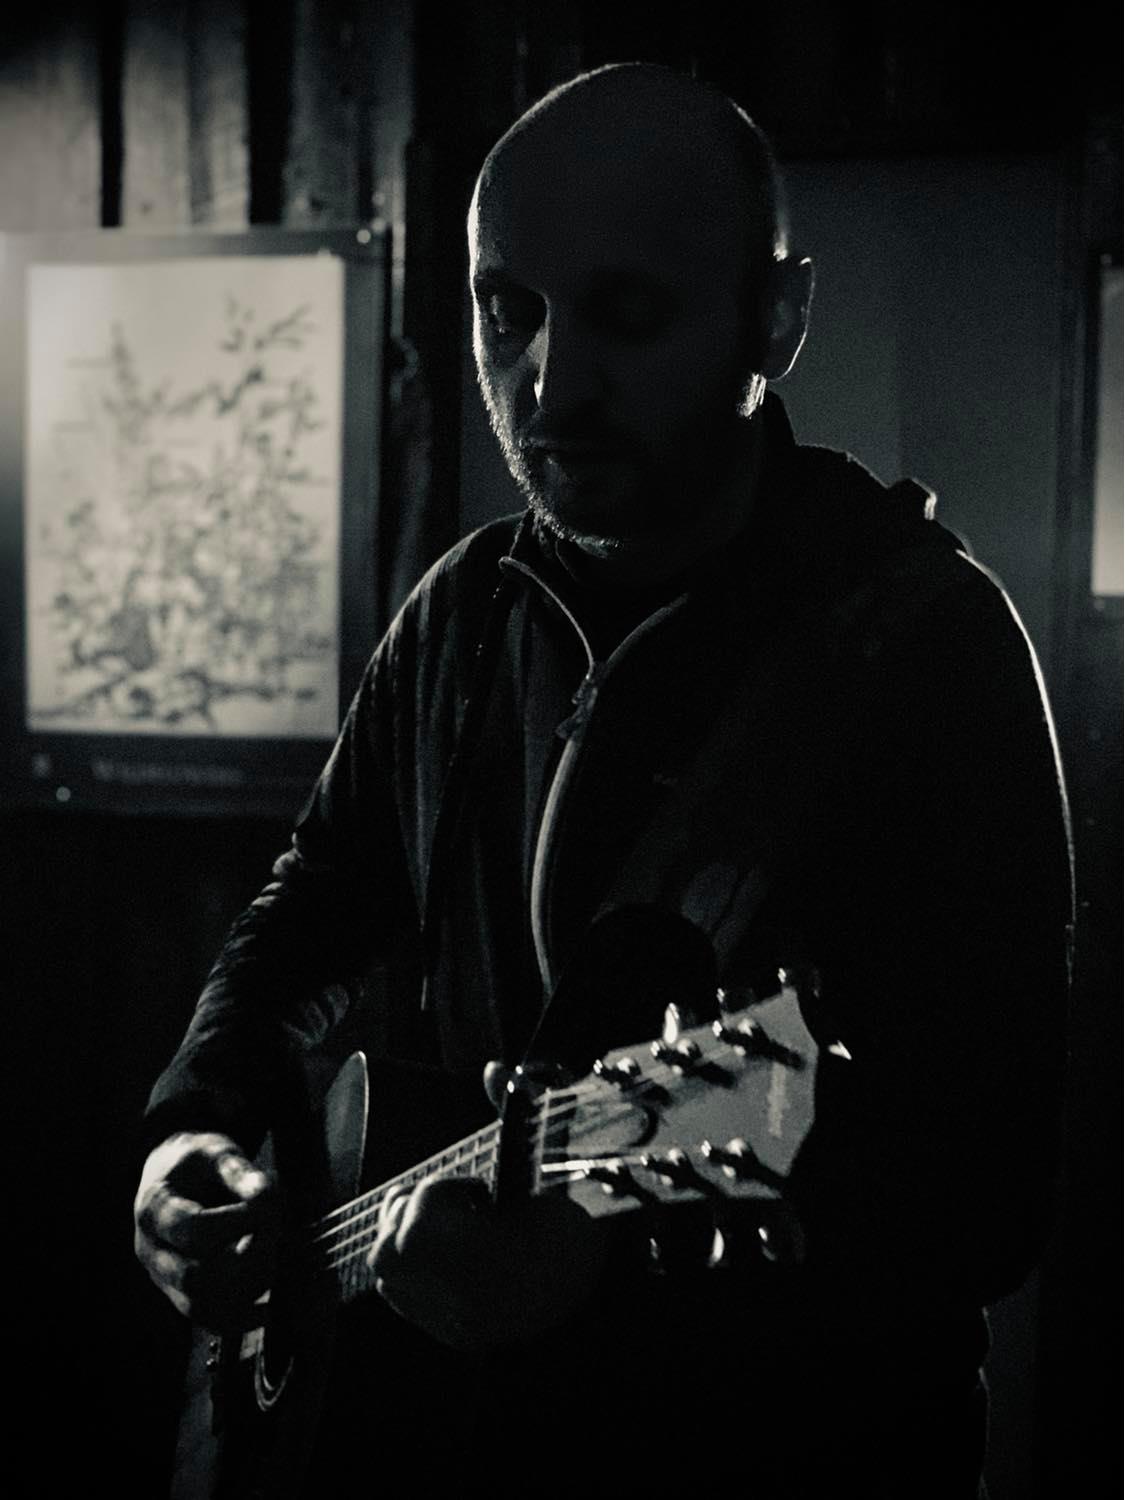 Photo of Dave standing in dark room and strumming a guitar. The guitar is catching the light as well as the stubble on one side of Dave's face.